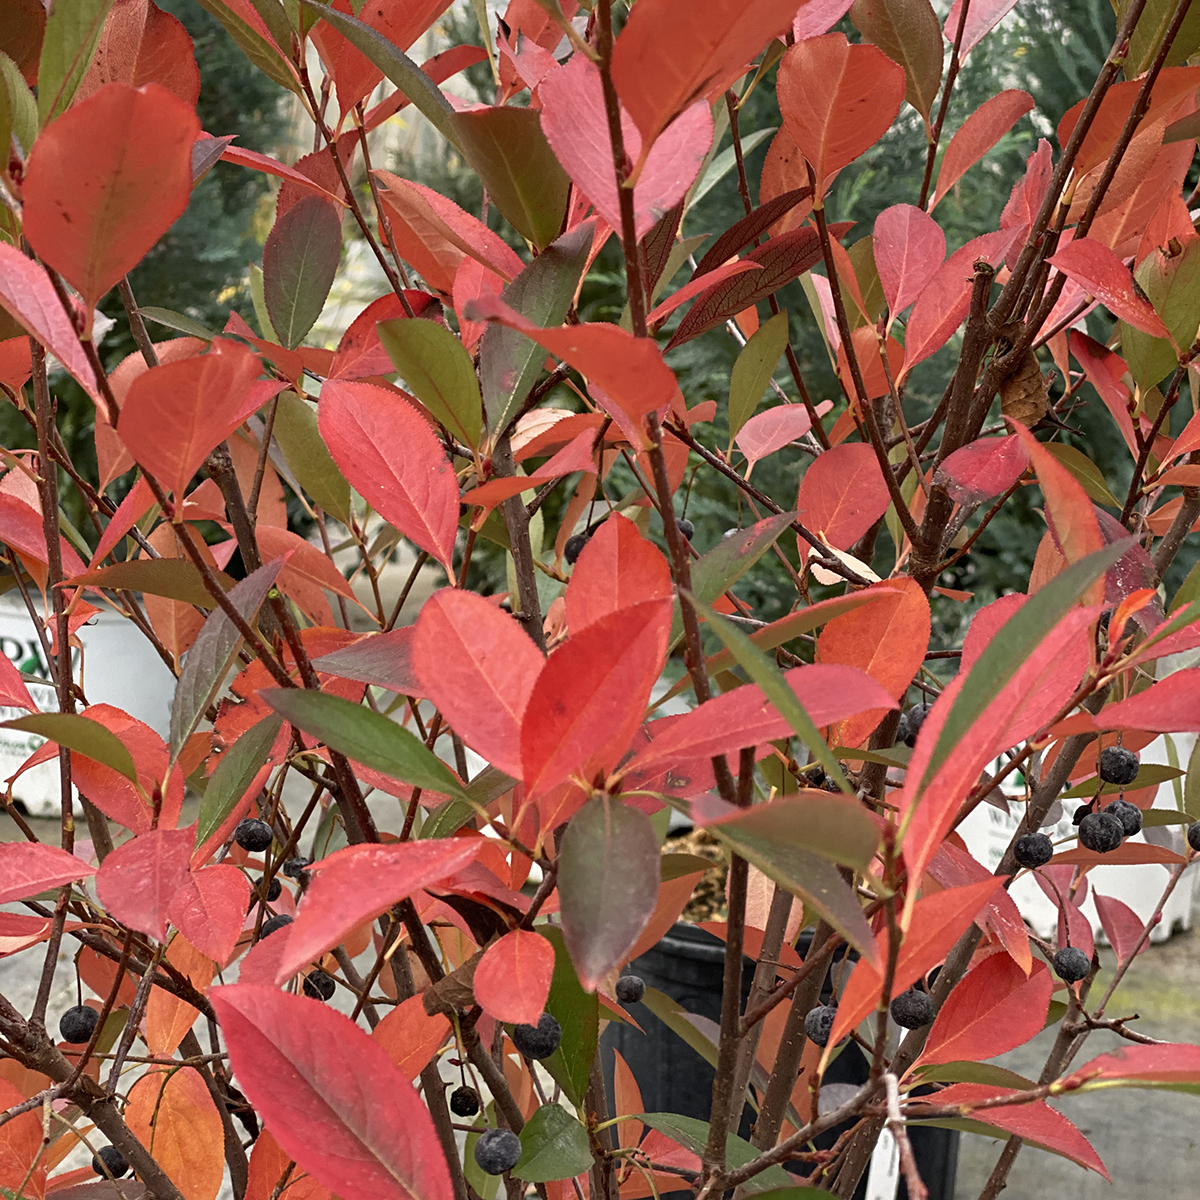 The colorful autumn foliage of Low Scape Snowfire aronia.